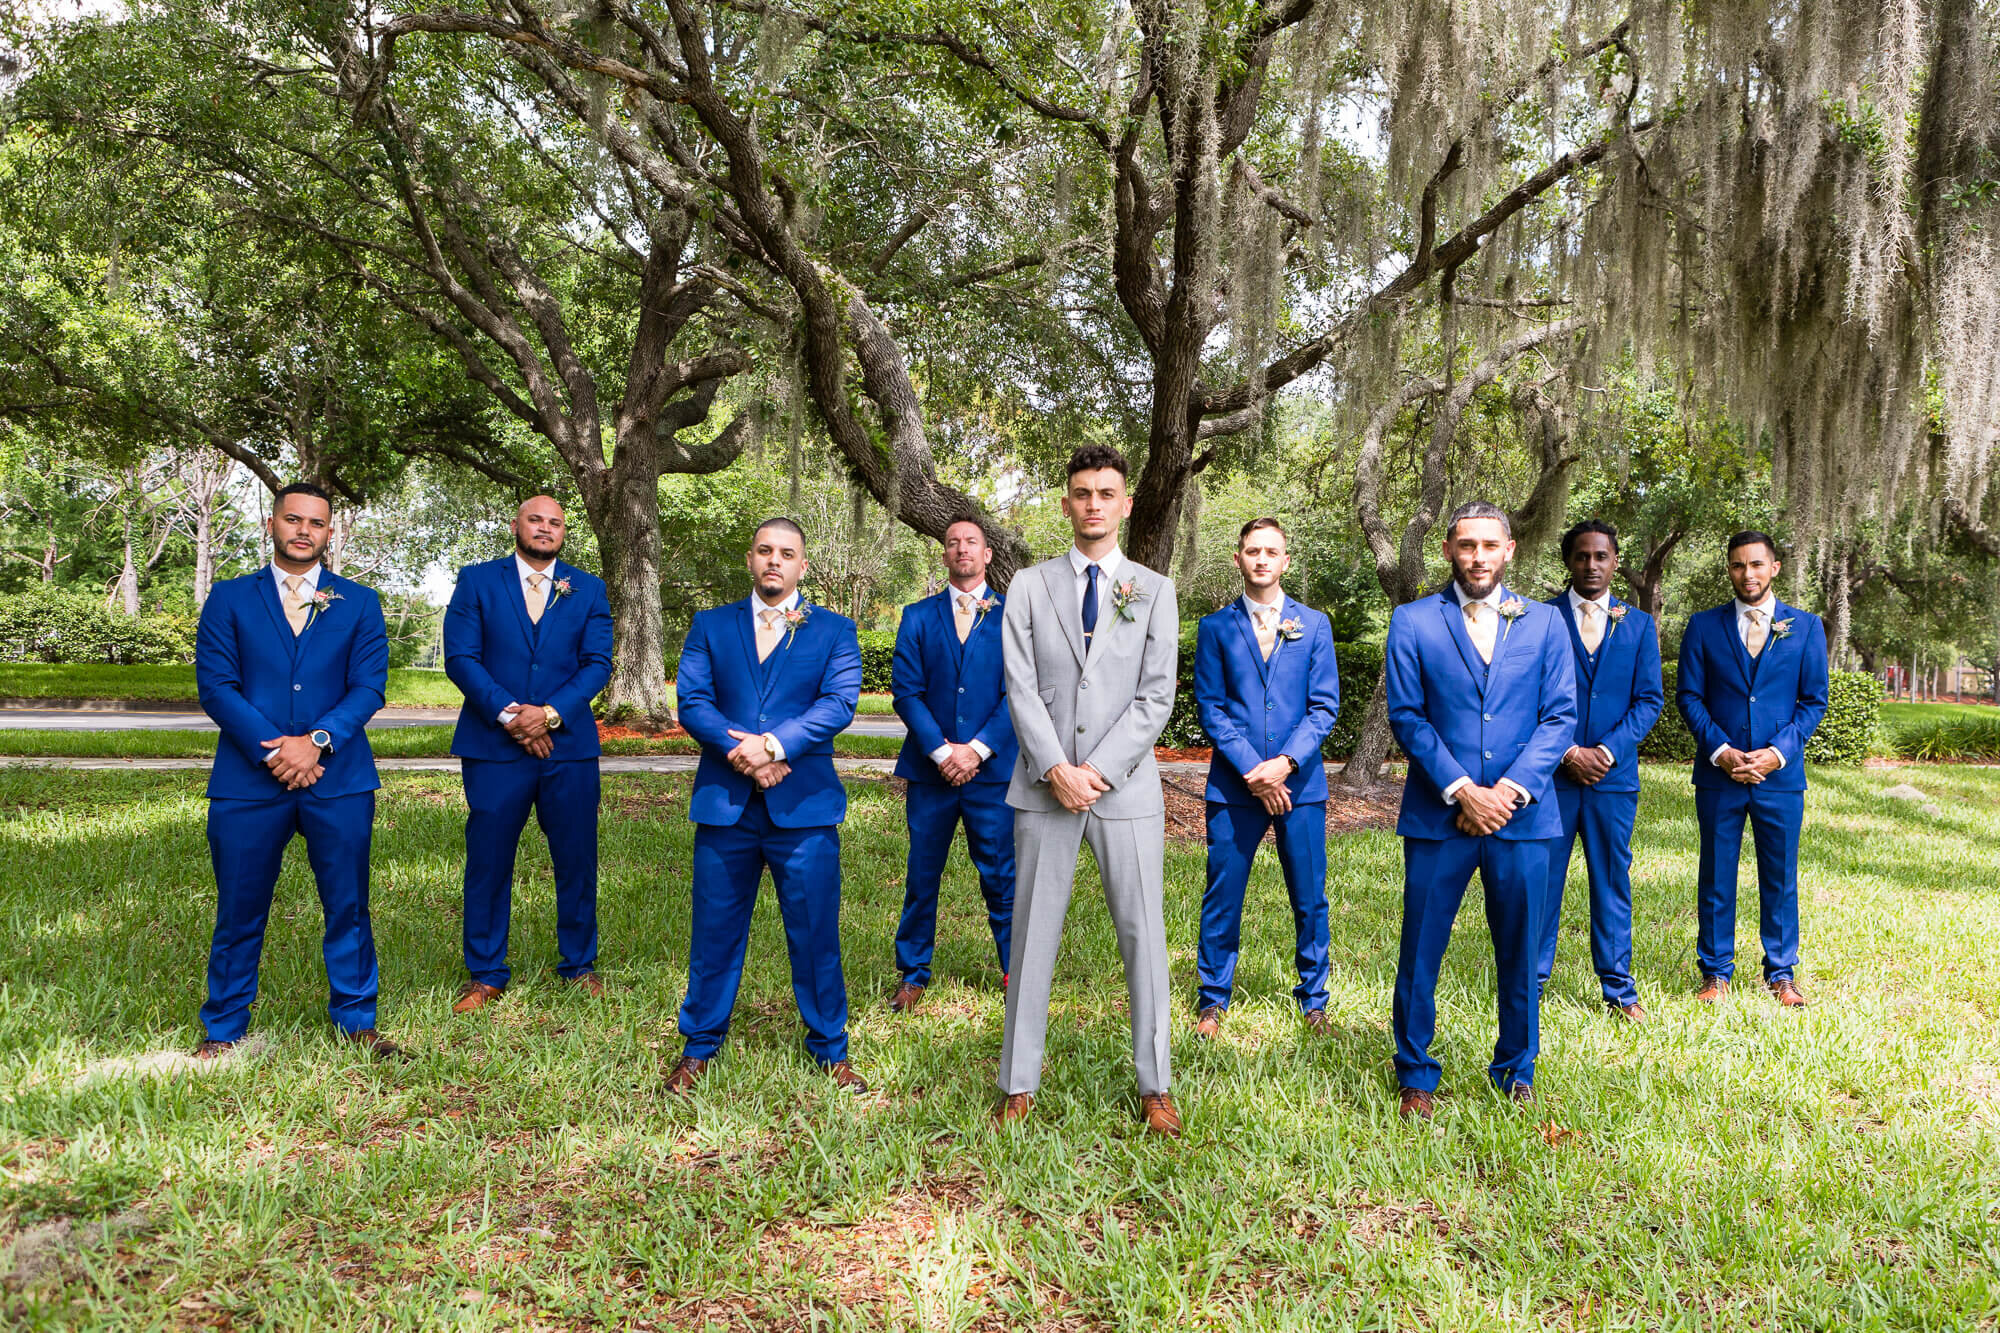  The royal blue and gold wedding of Jessica and Bruce at Noah's Event Venue in Lake Mary, Florida 